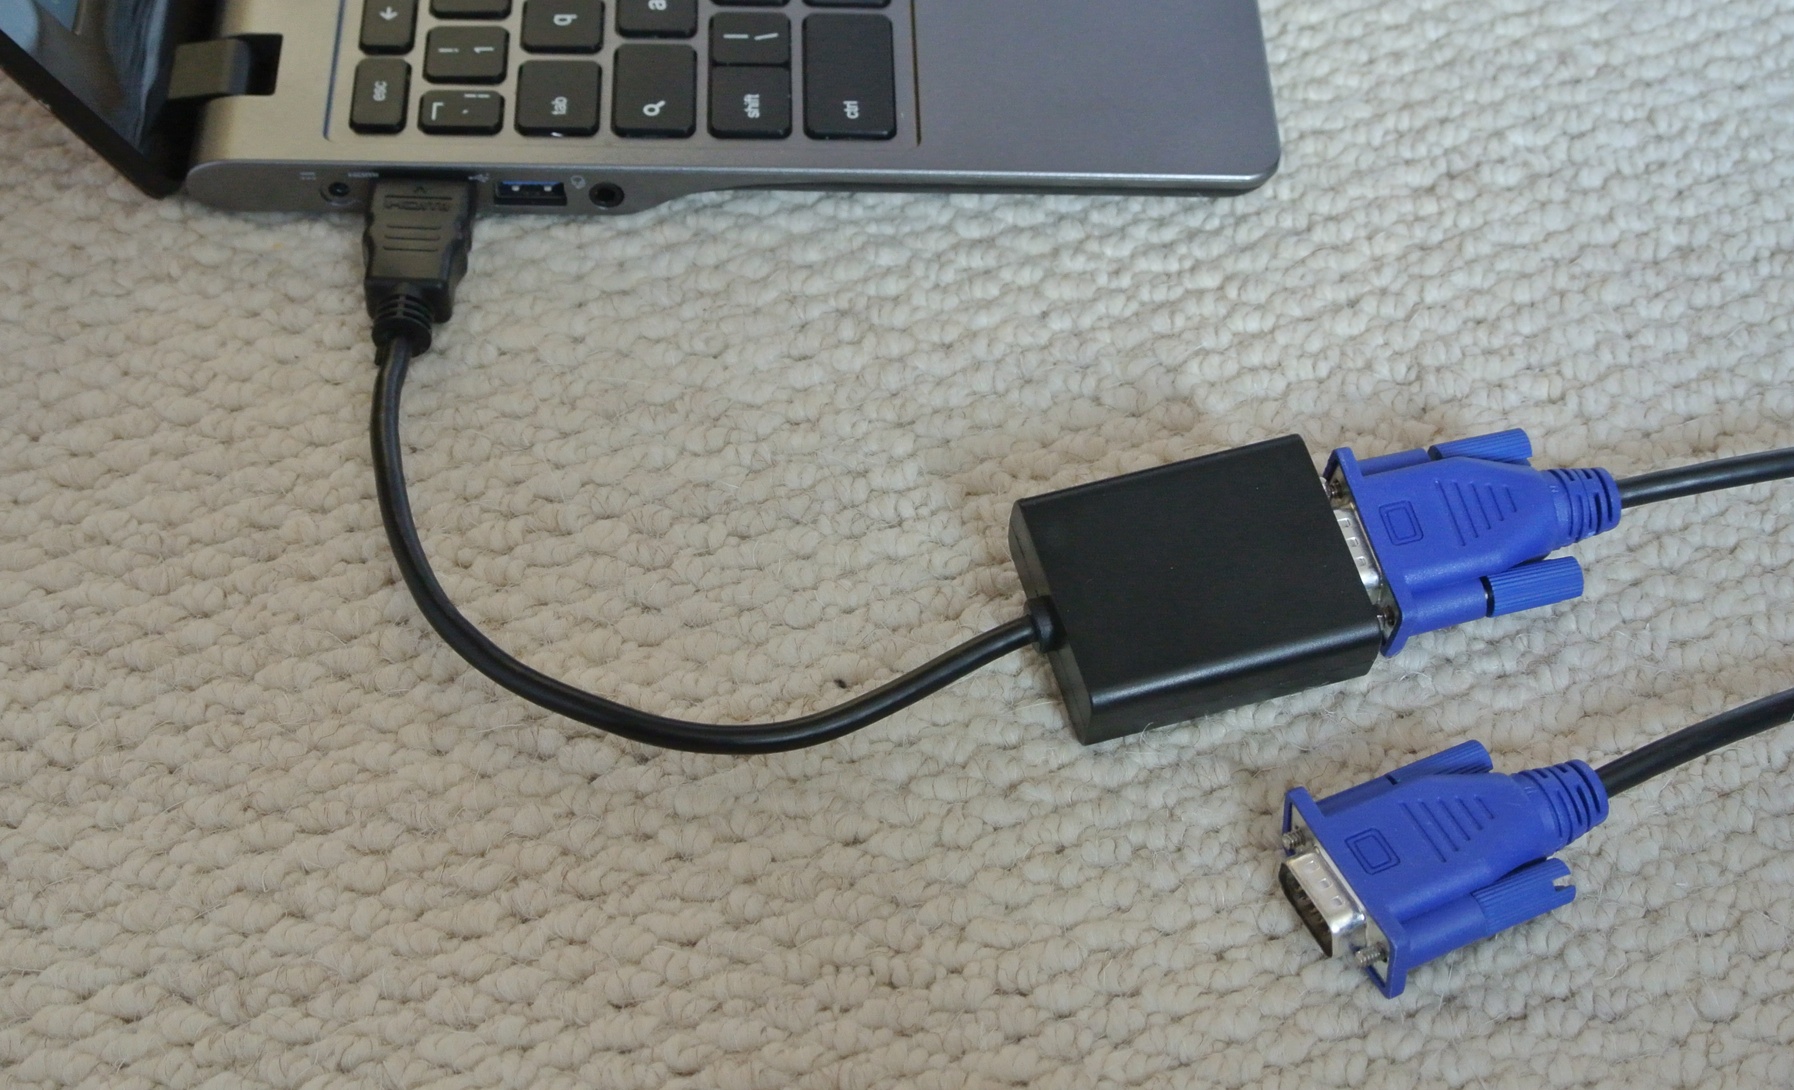 how to connect a projector to a laptop through hdmi